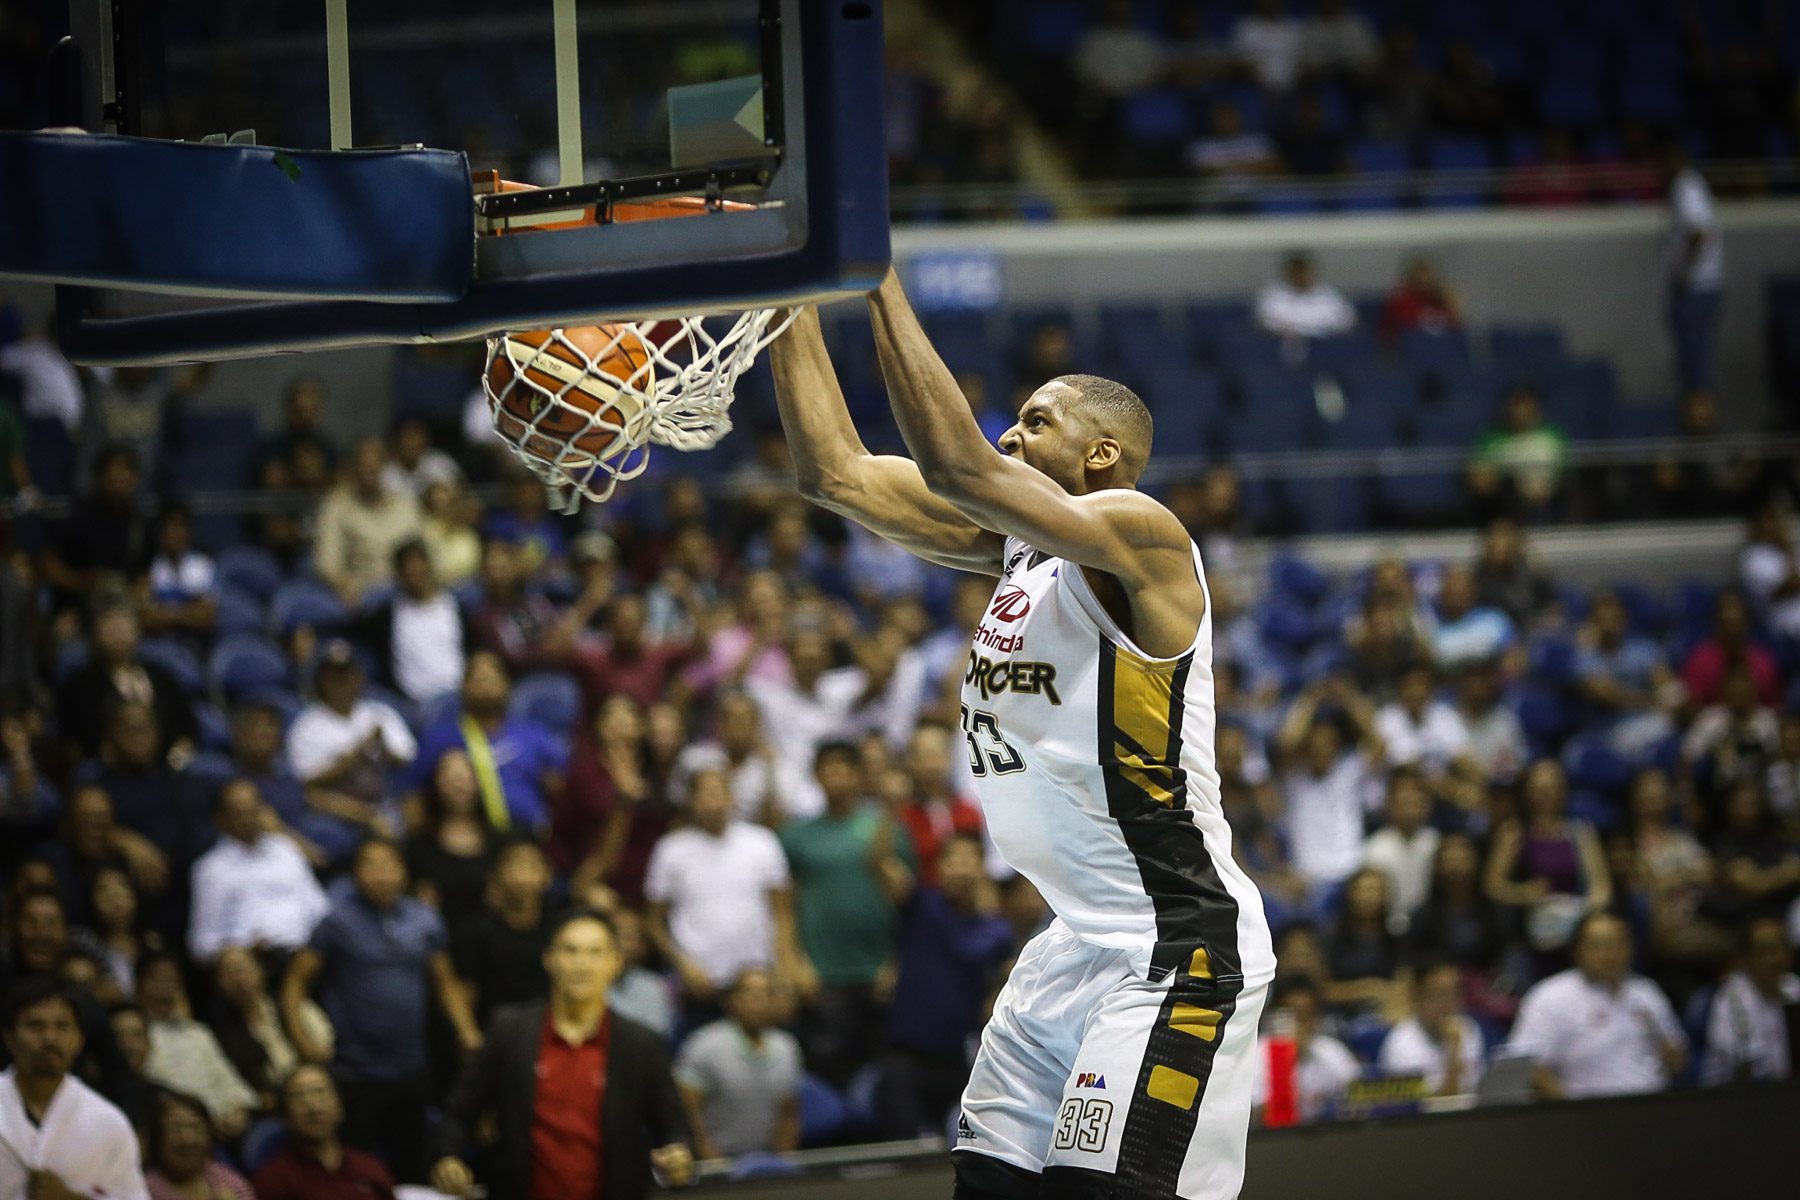 In Pacquiao’s return, Mahindra comes from behind to stun Alaska